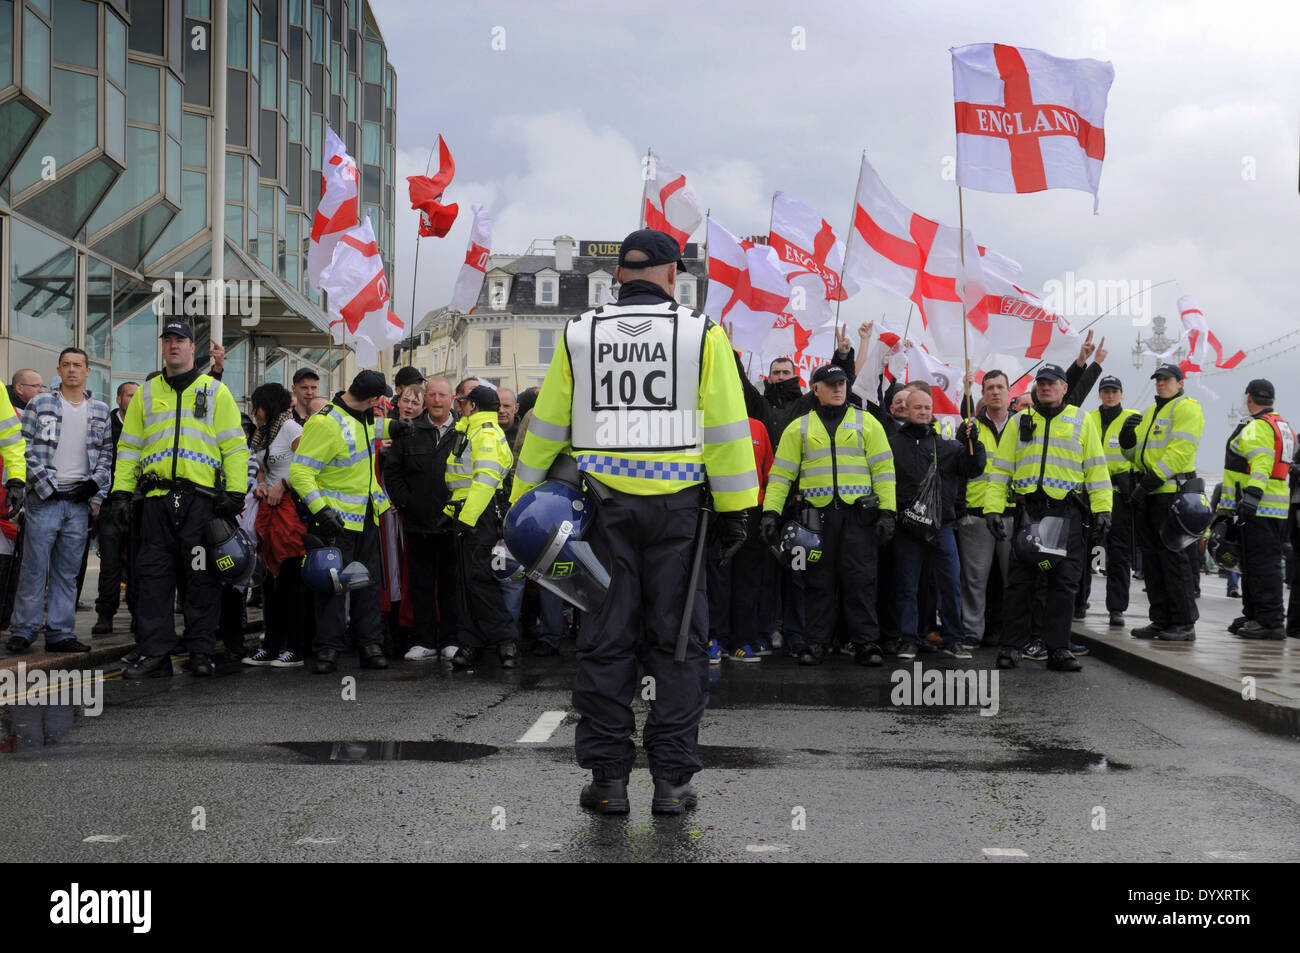 Brighton, East Sussex, UK. 27 April 2014. The centre of Brighton was brought to a standstill this afternoon as Police kept rival factions apart. About 150 marchers were outnumbered by Police and those opposed to the March. Stock Photo